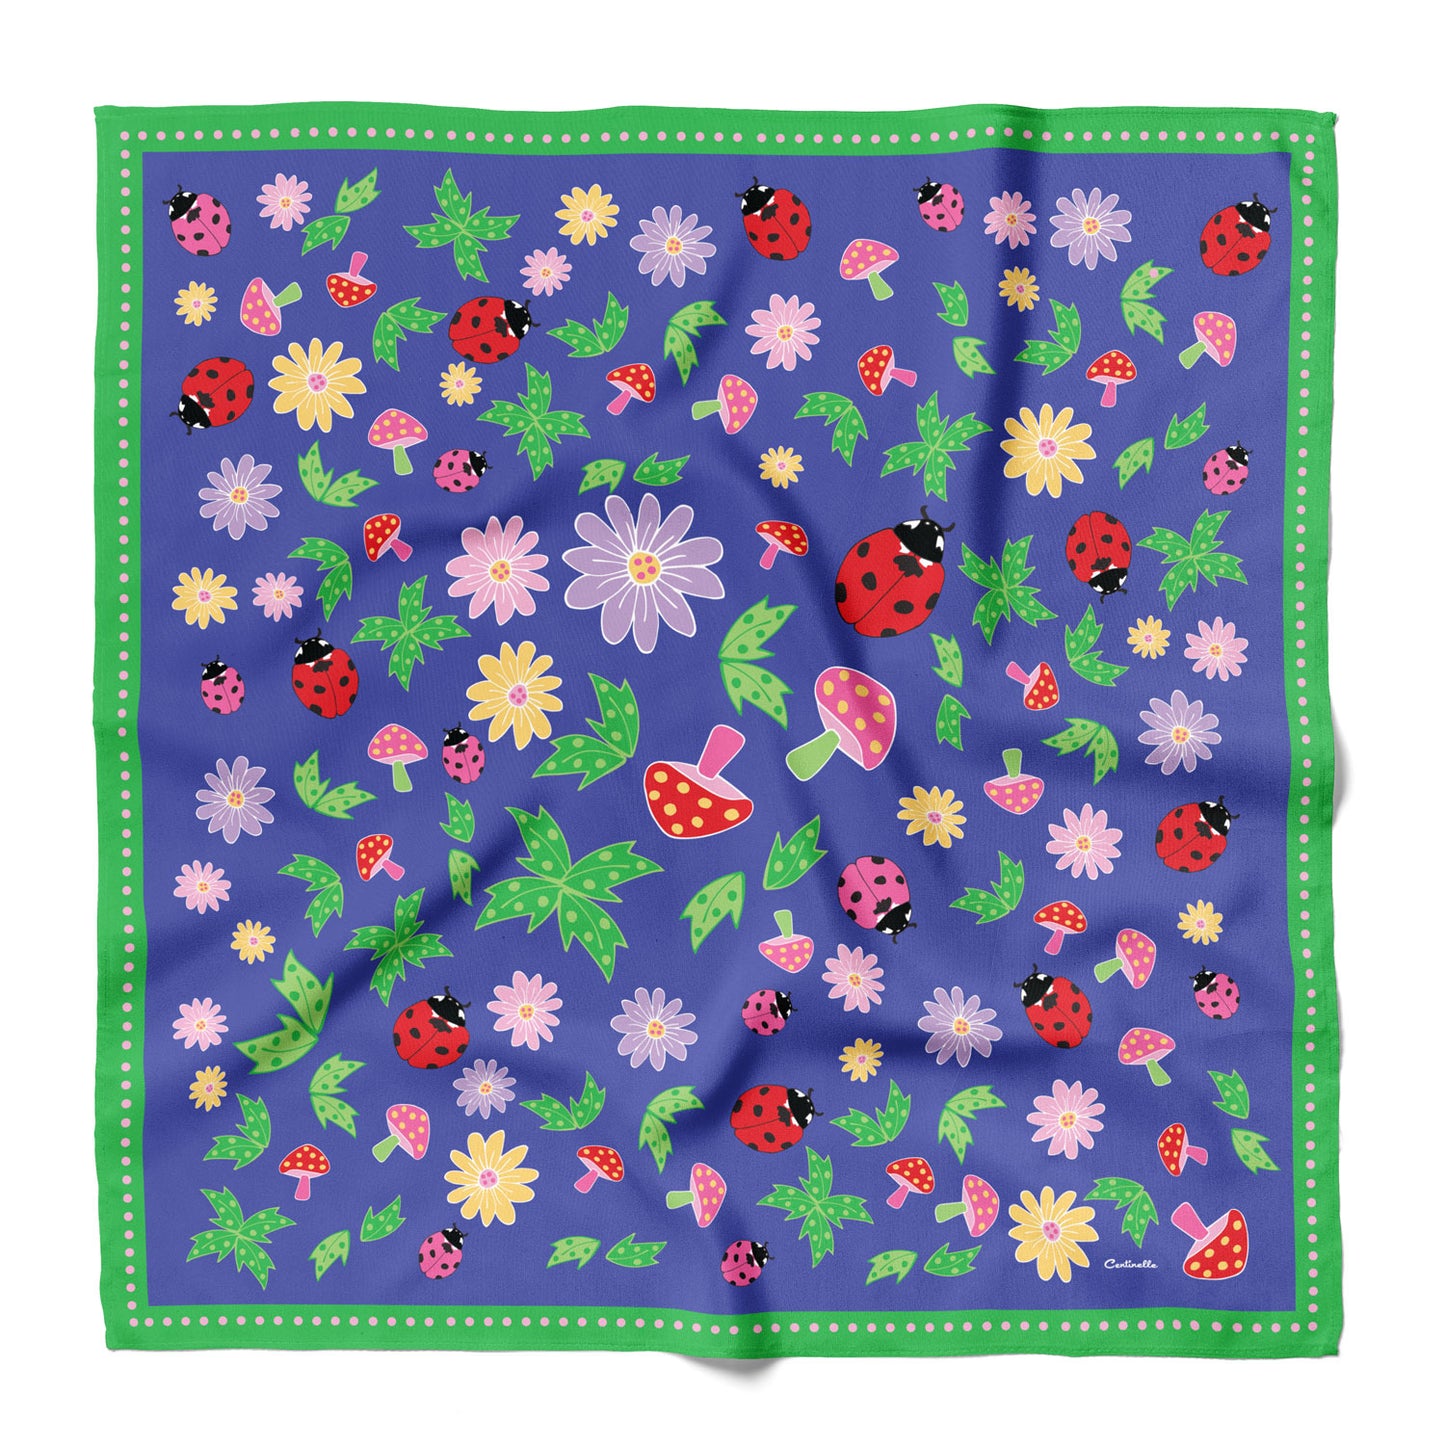 Silk bandana with ladybugs and plants with a green border.